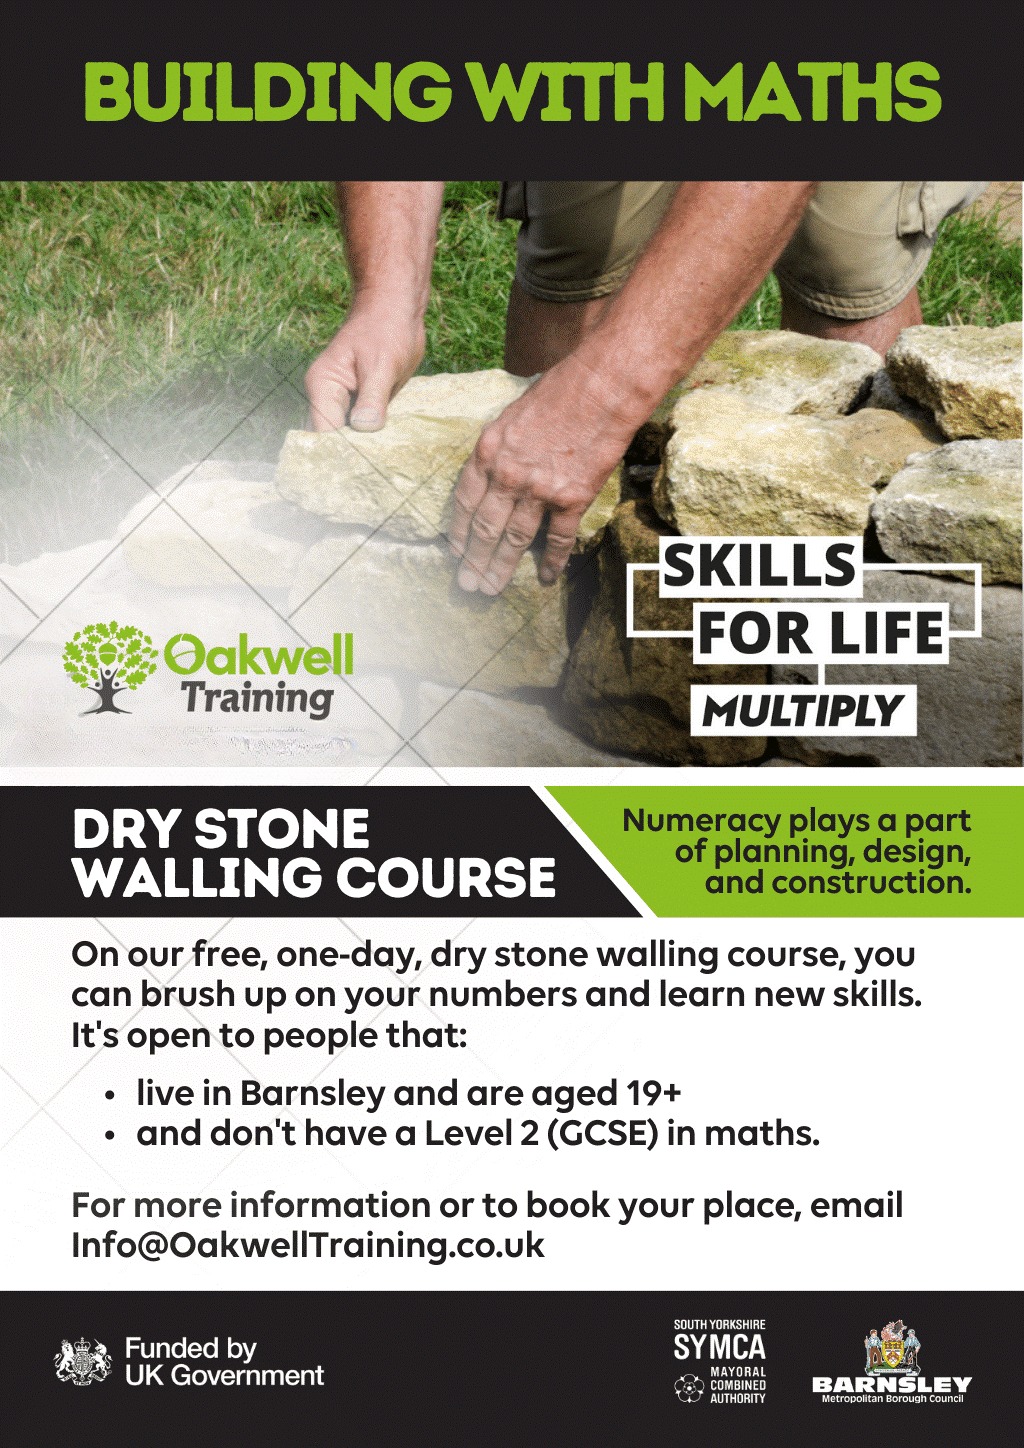 Dry stone walling course & maths flyer